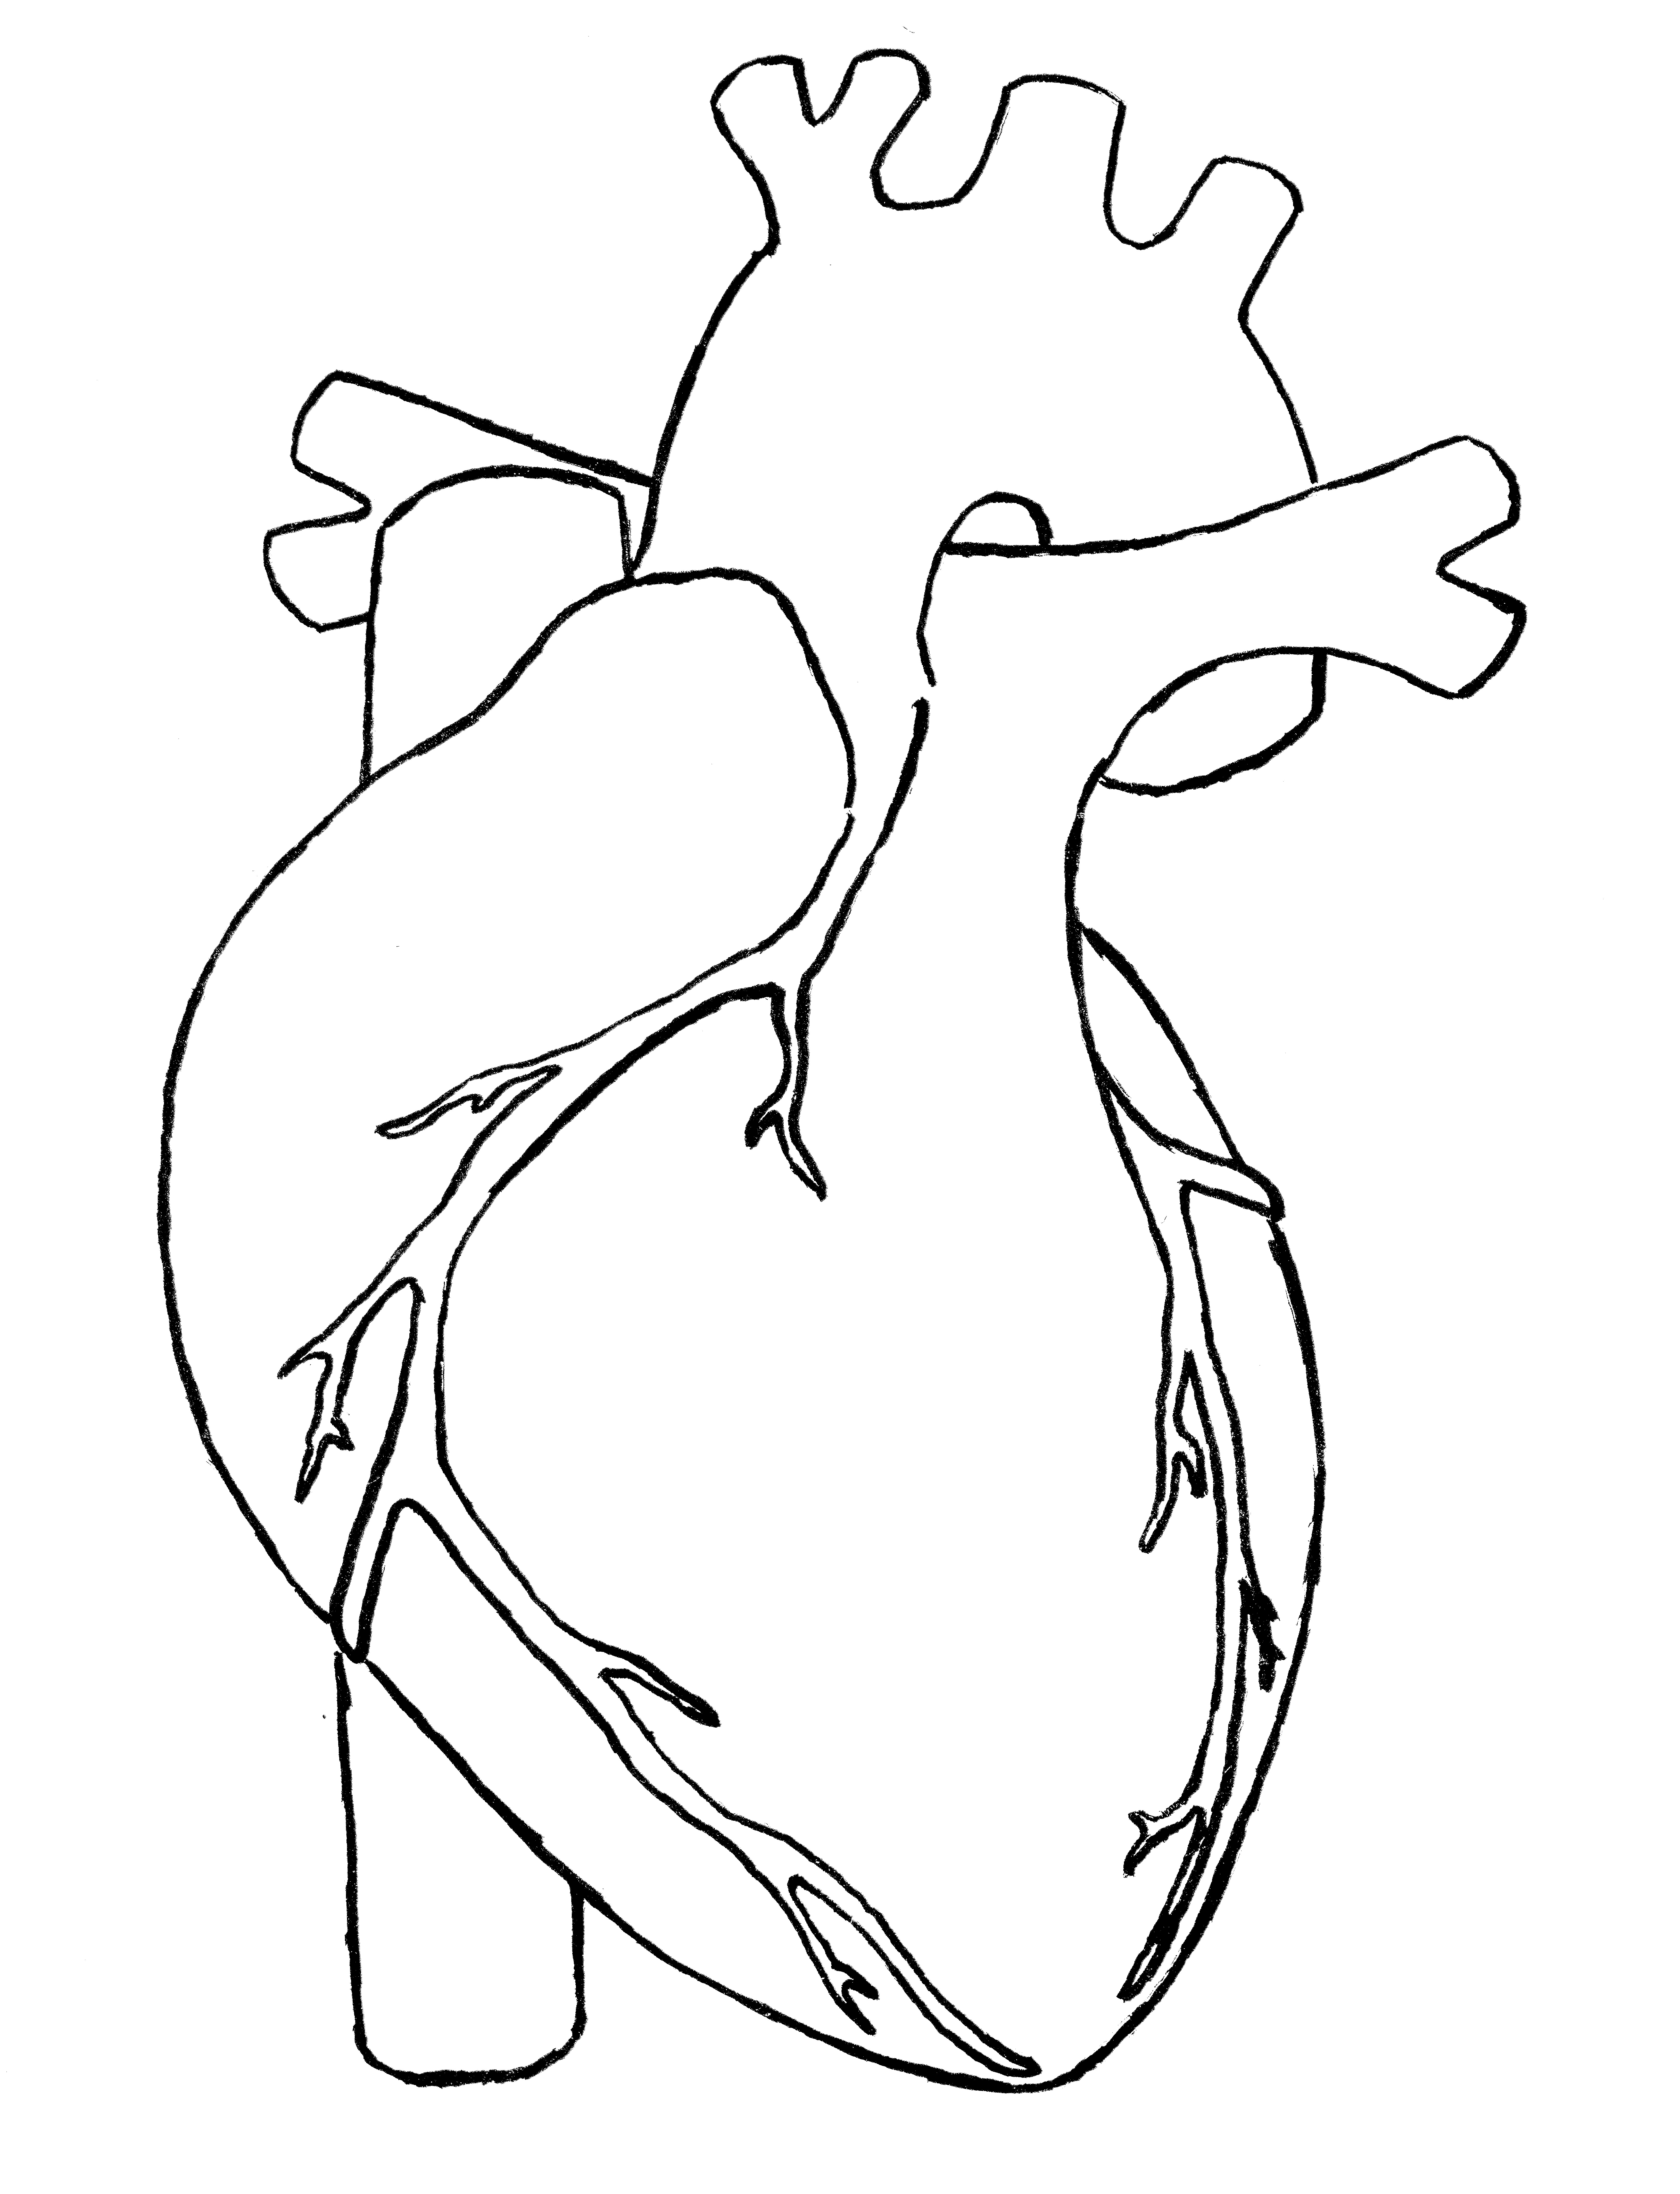 Human heart clipart drawing - ClipartFest